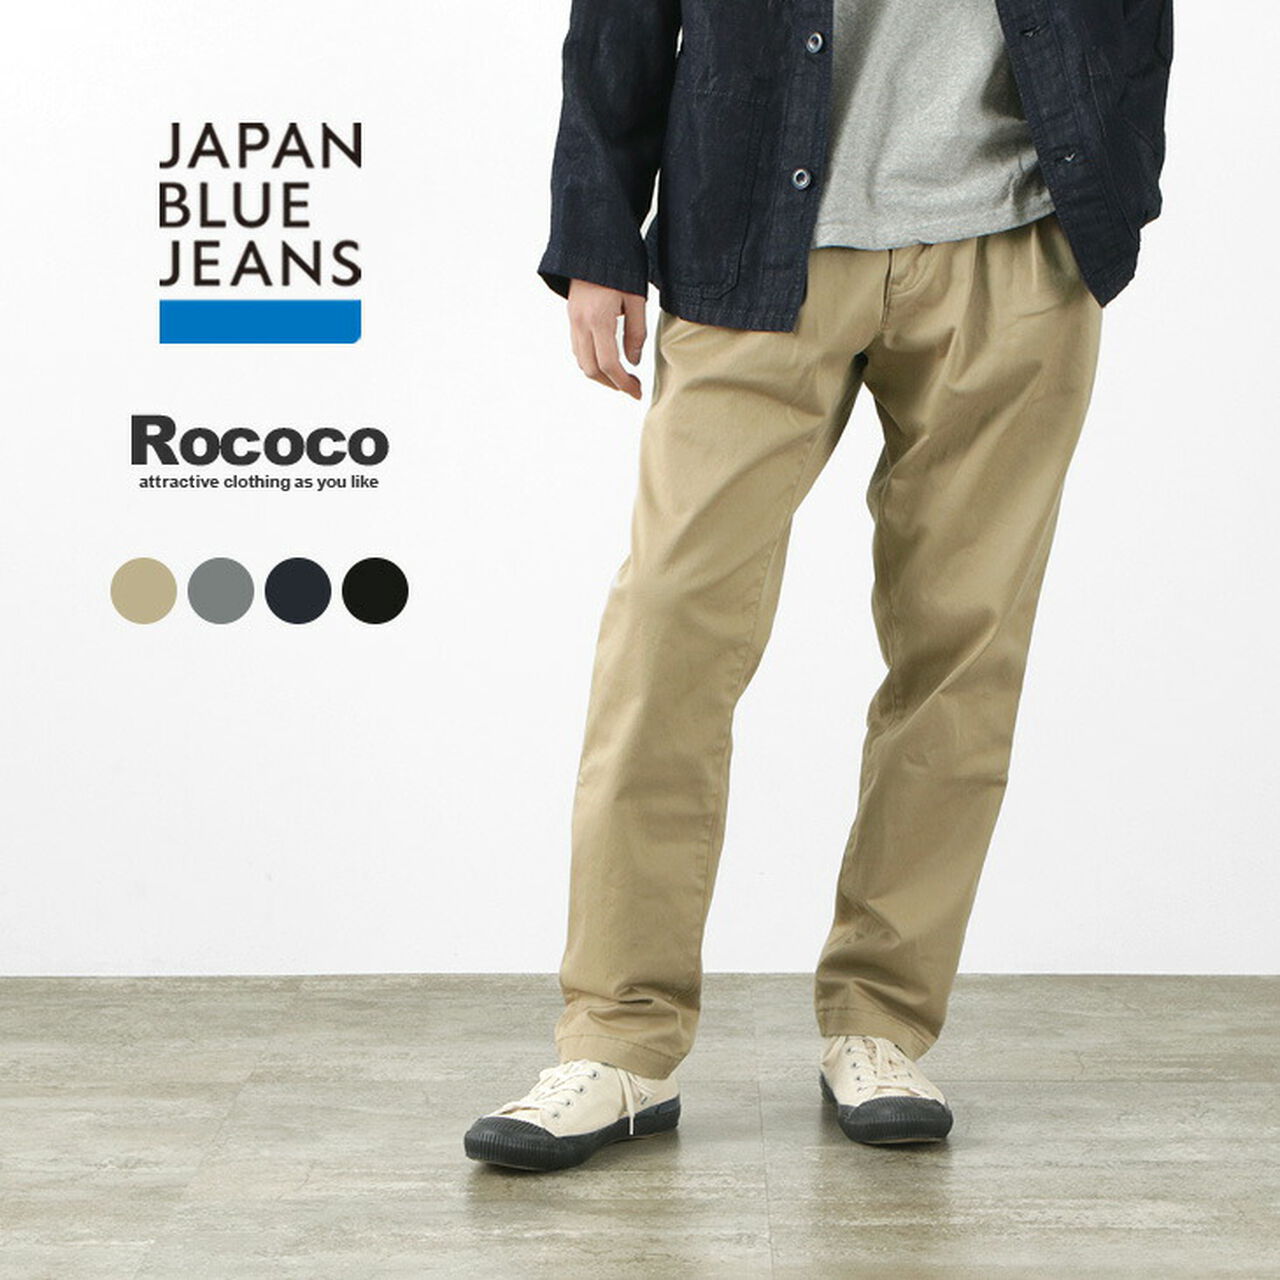 JAPAN JEANS Special RJB4660 2-tuck office trousers